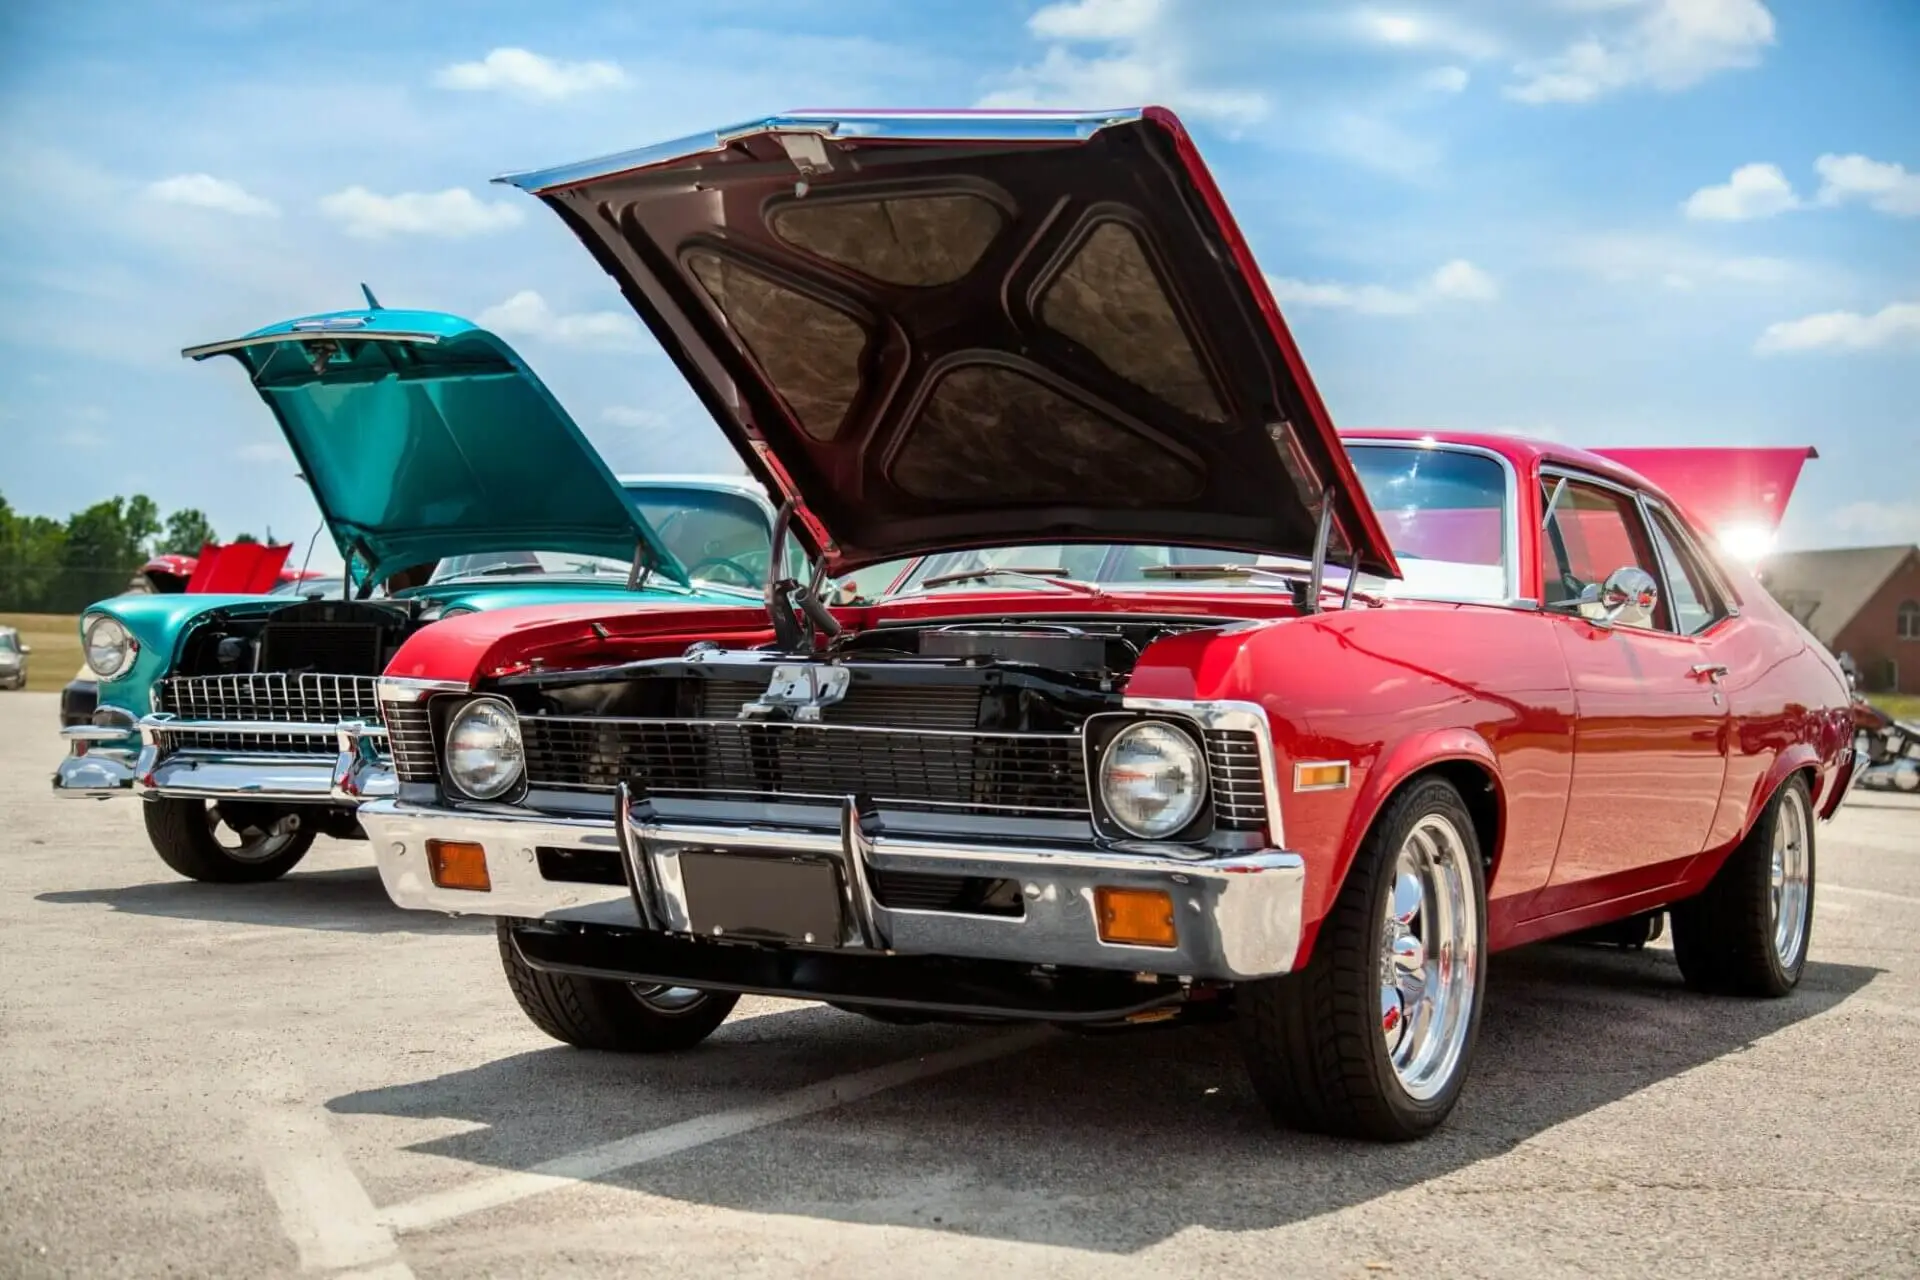 Discover the Best Deals on Vintage Cars for Sale